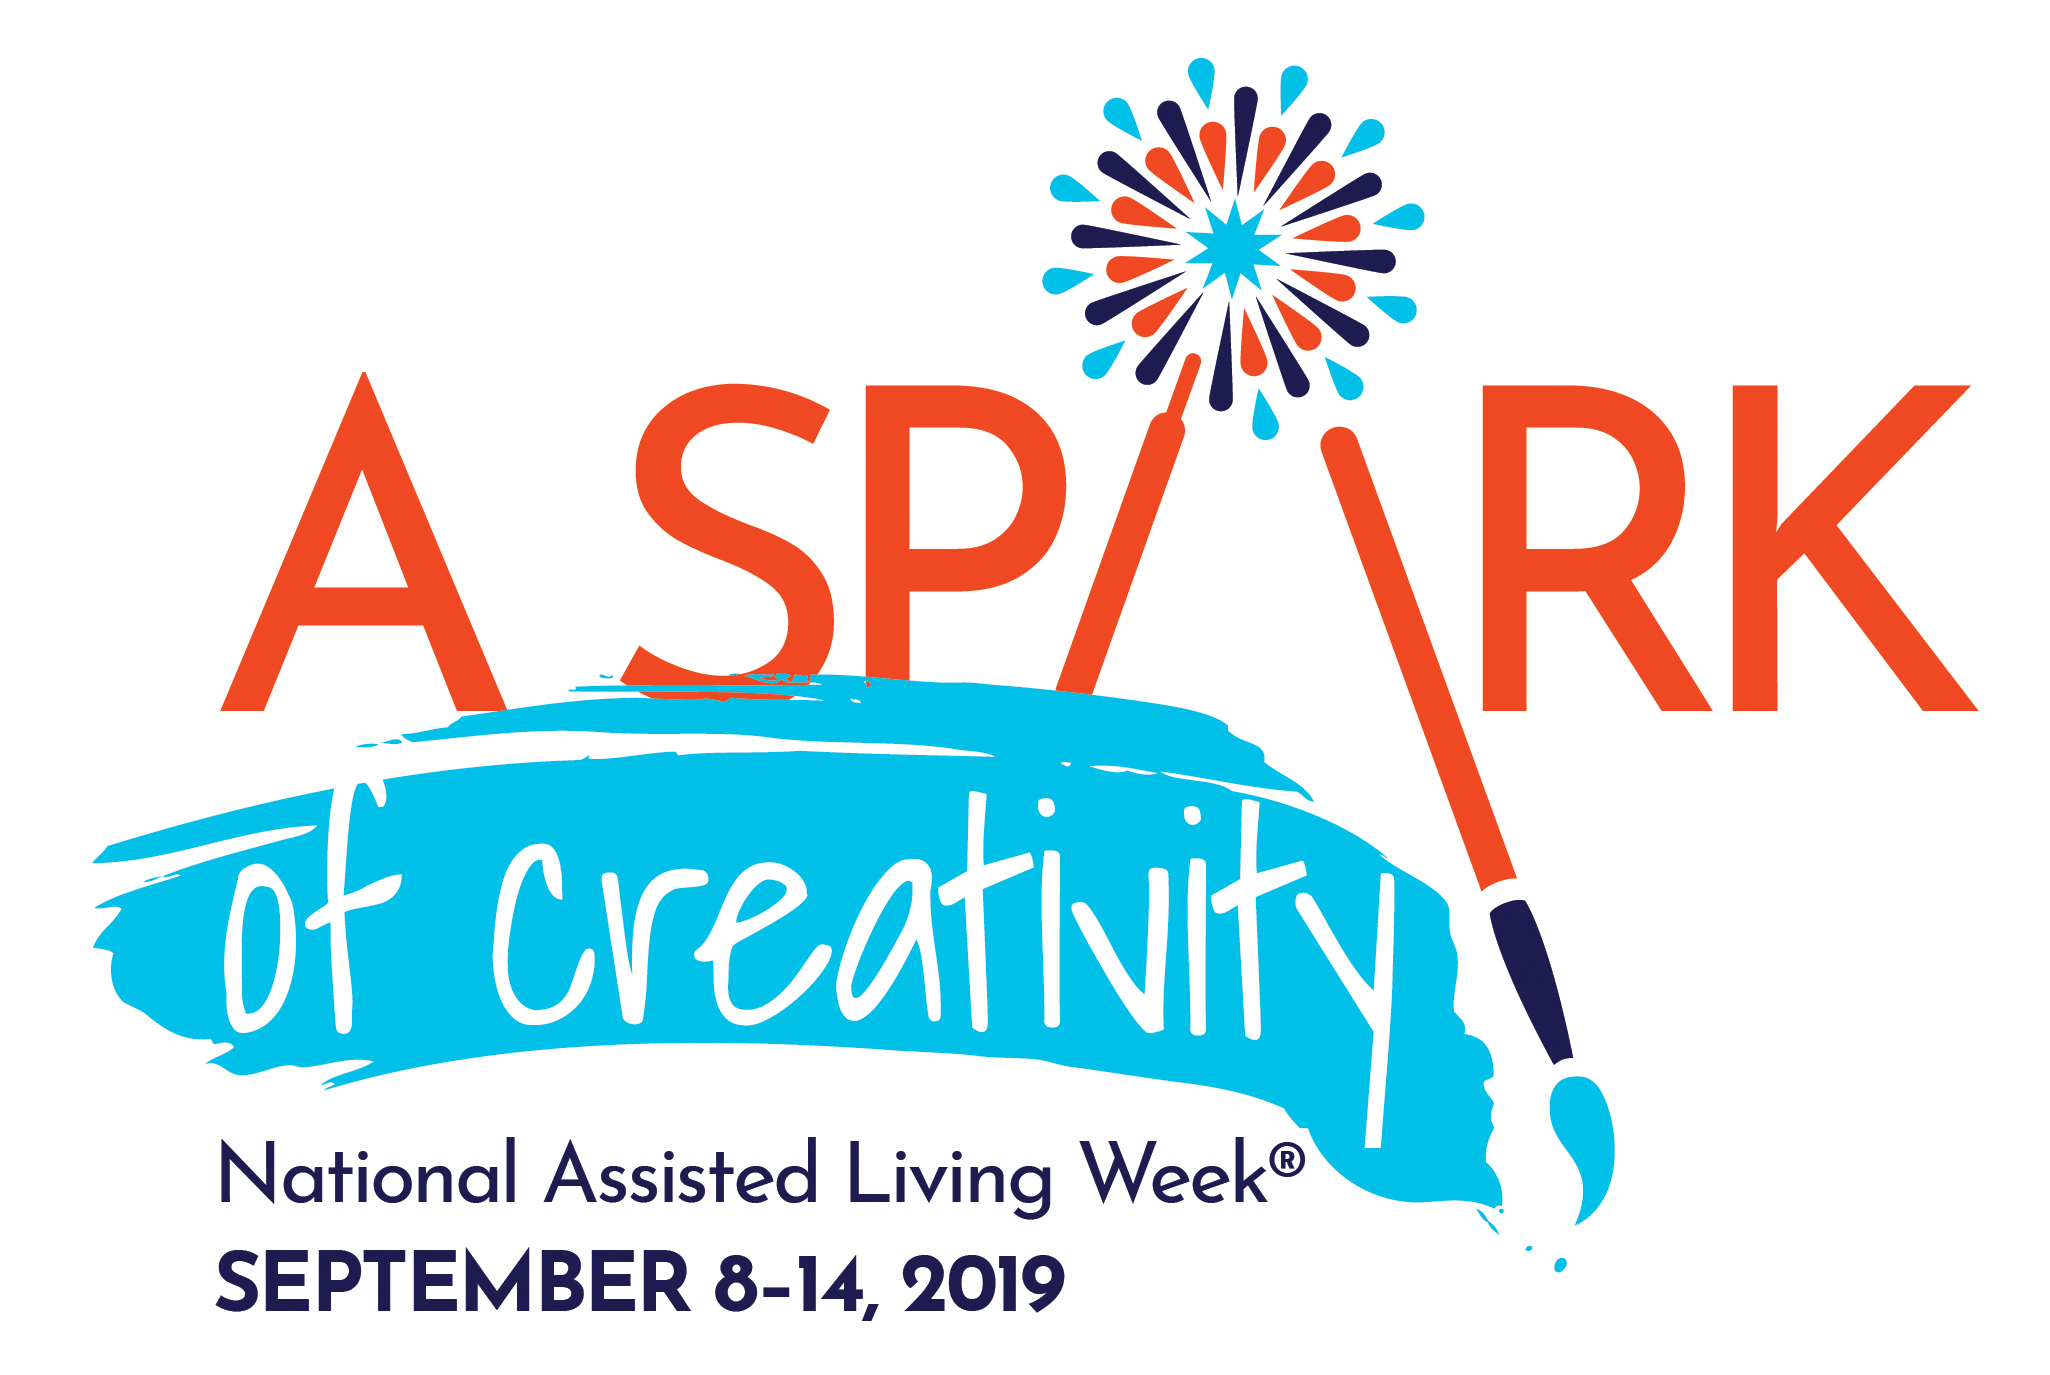 National Assisted Living Week begins with “A Spark of Creativity